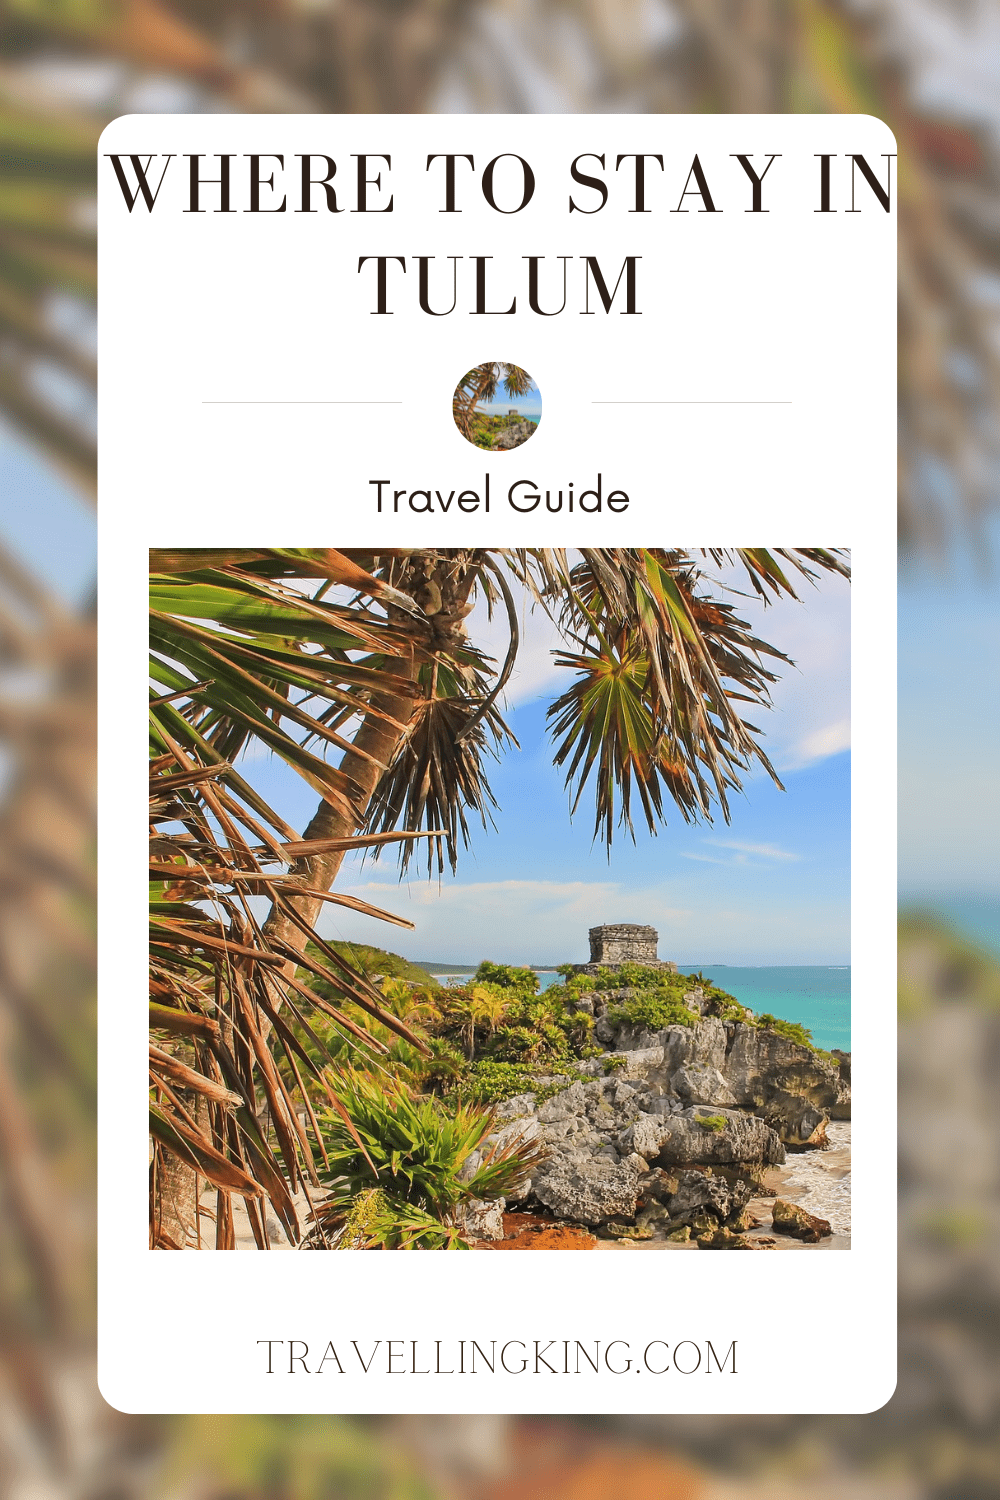 Where to stay in Tulum